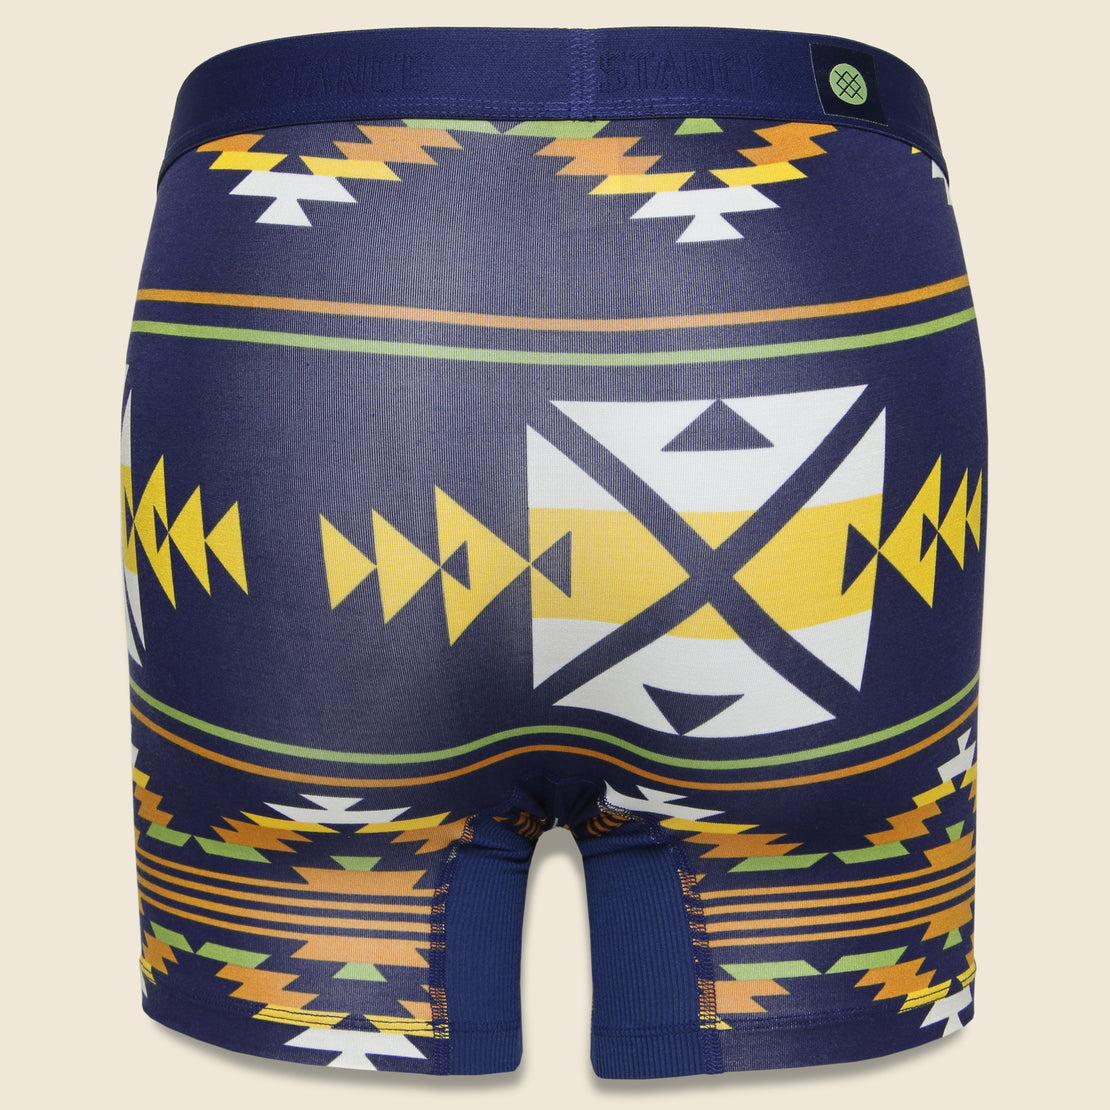 Butter Blend Guided Boxer Brief - Navy - Stance - STAG Provisions - Accessories - Underwear